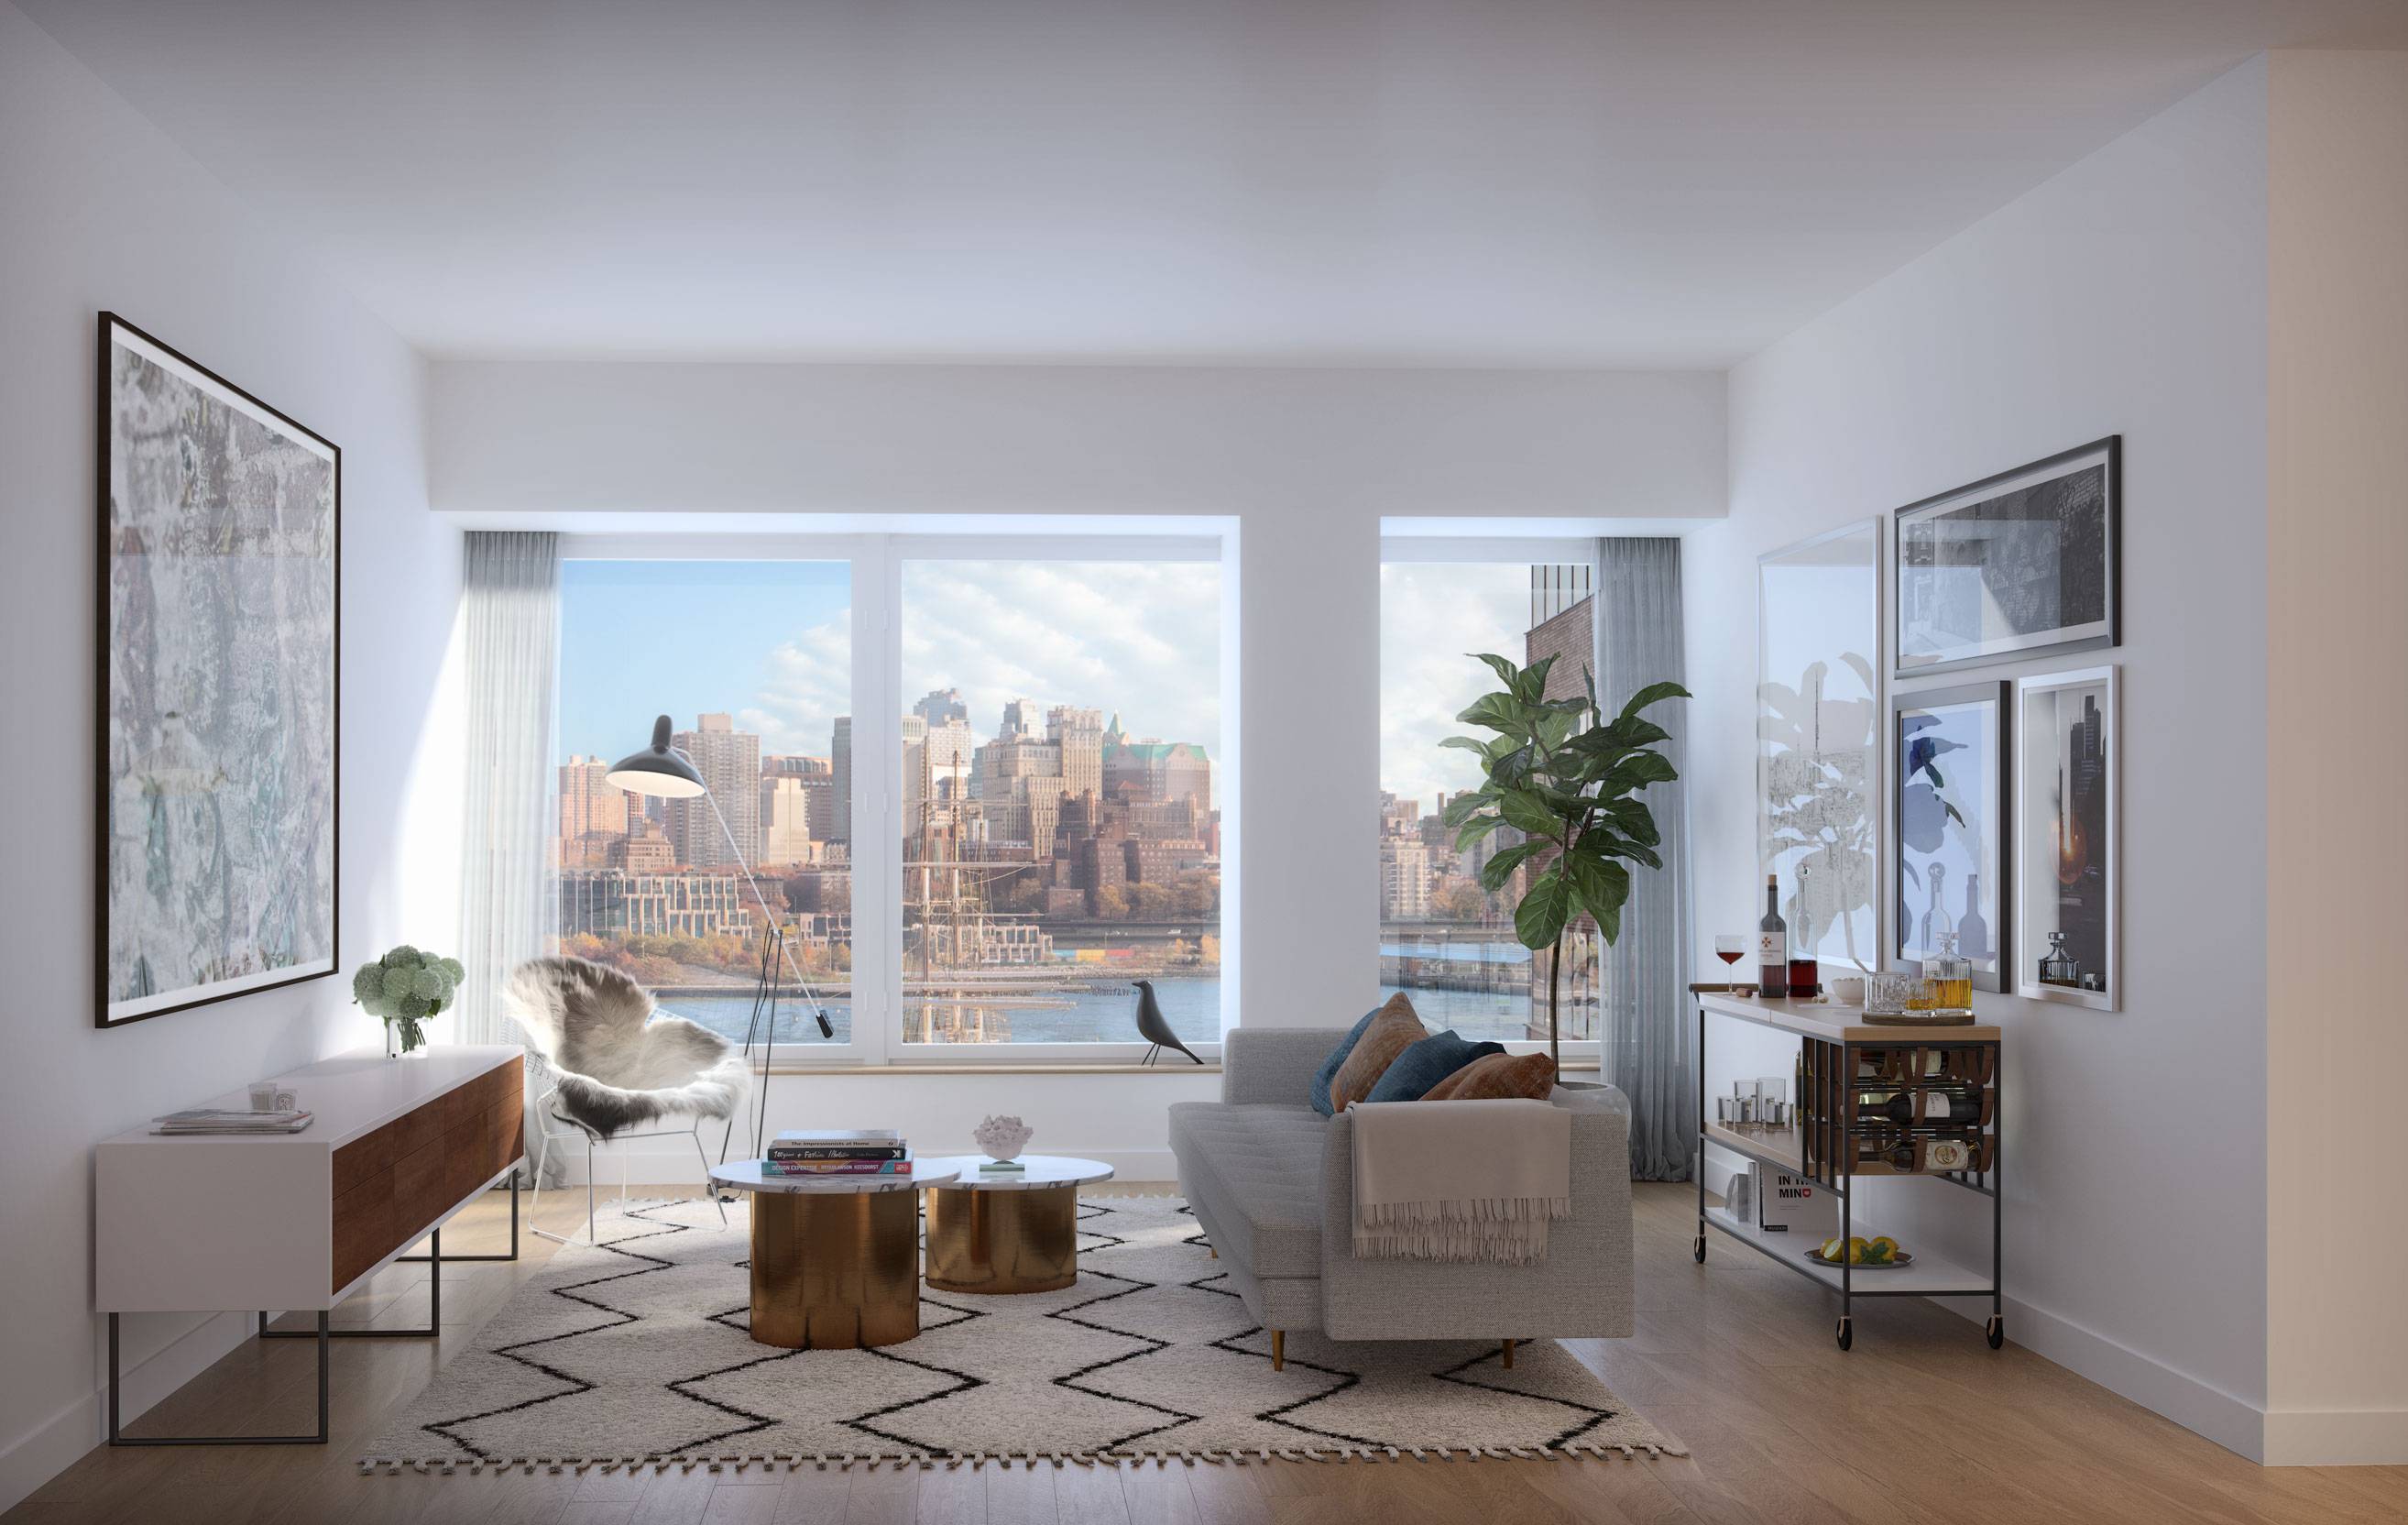 3-Bedroom Apartment In Rooftop Pool Building In Financial District